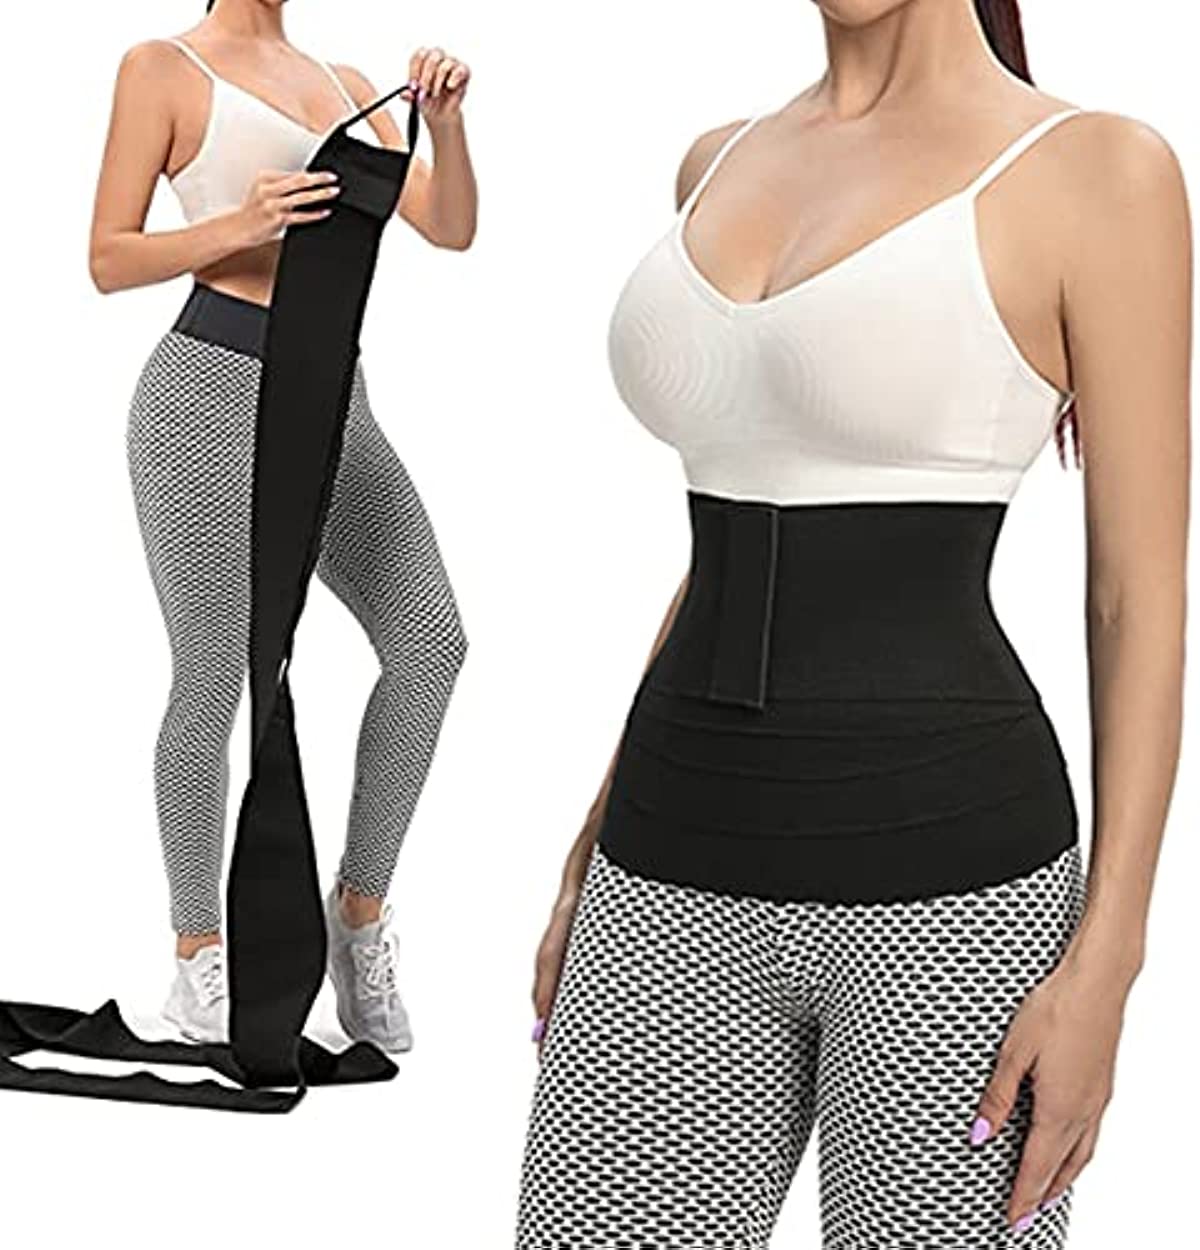 Miookiss Waist Trainer for Women Lower Belly Fat，Plus Size Women Tummy Control Waist Shaper with Loop， Black Adjust and Comfortable Waist Cincher Shapewear